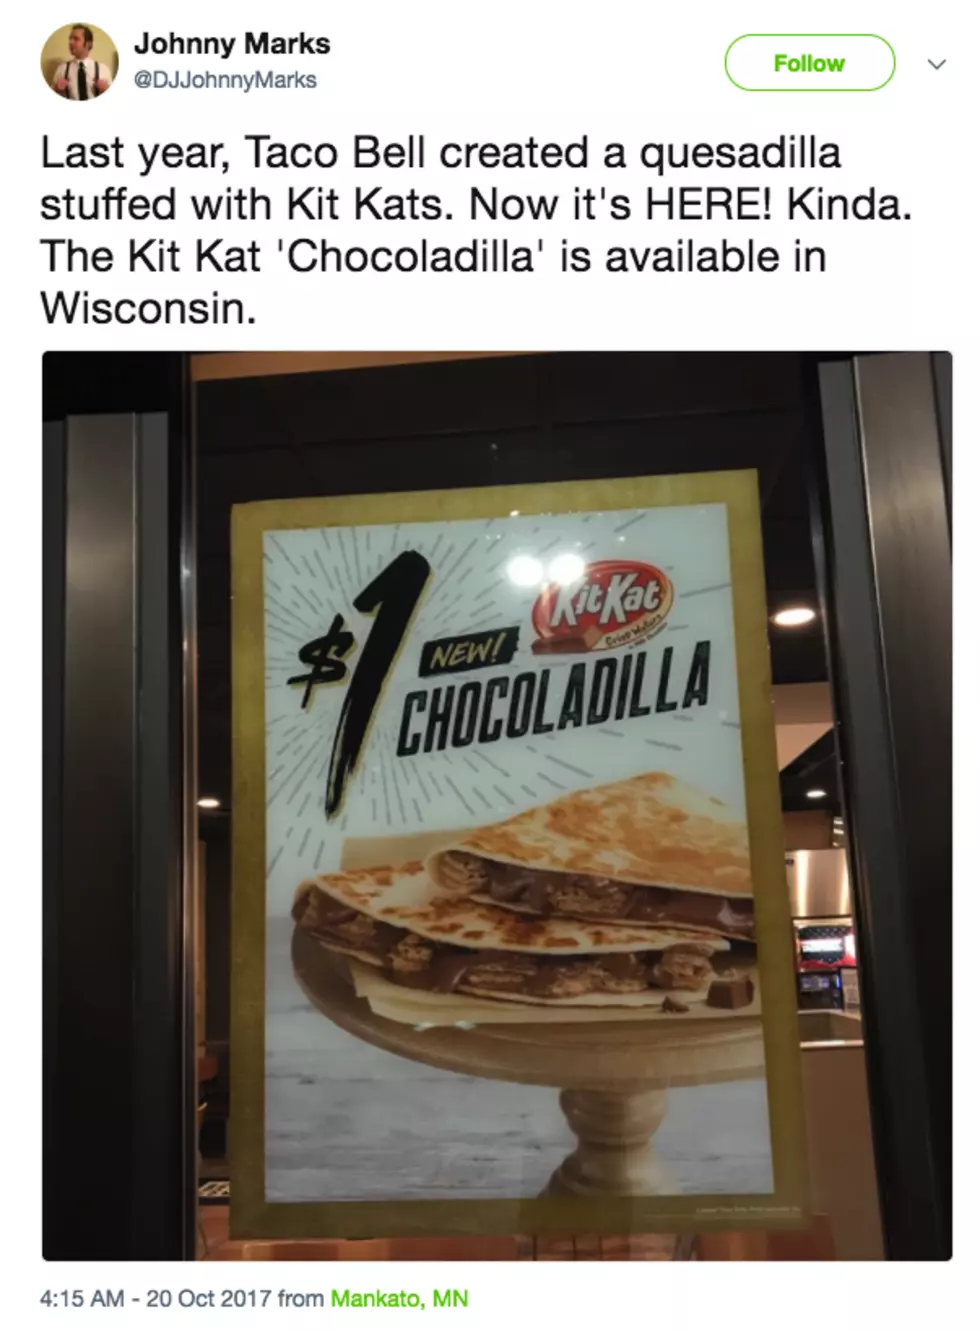 Just When You Thought Taco Bell Couldn’t Do Anything Else Weird